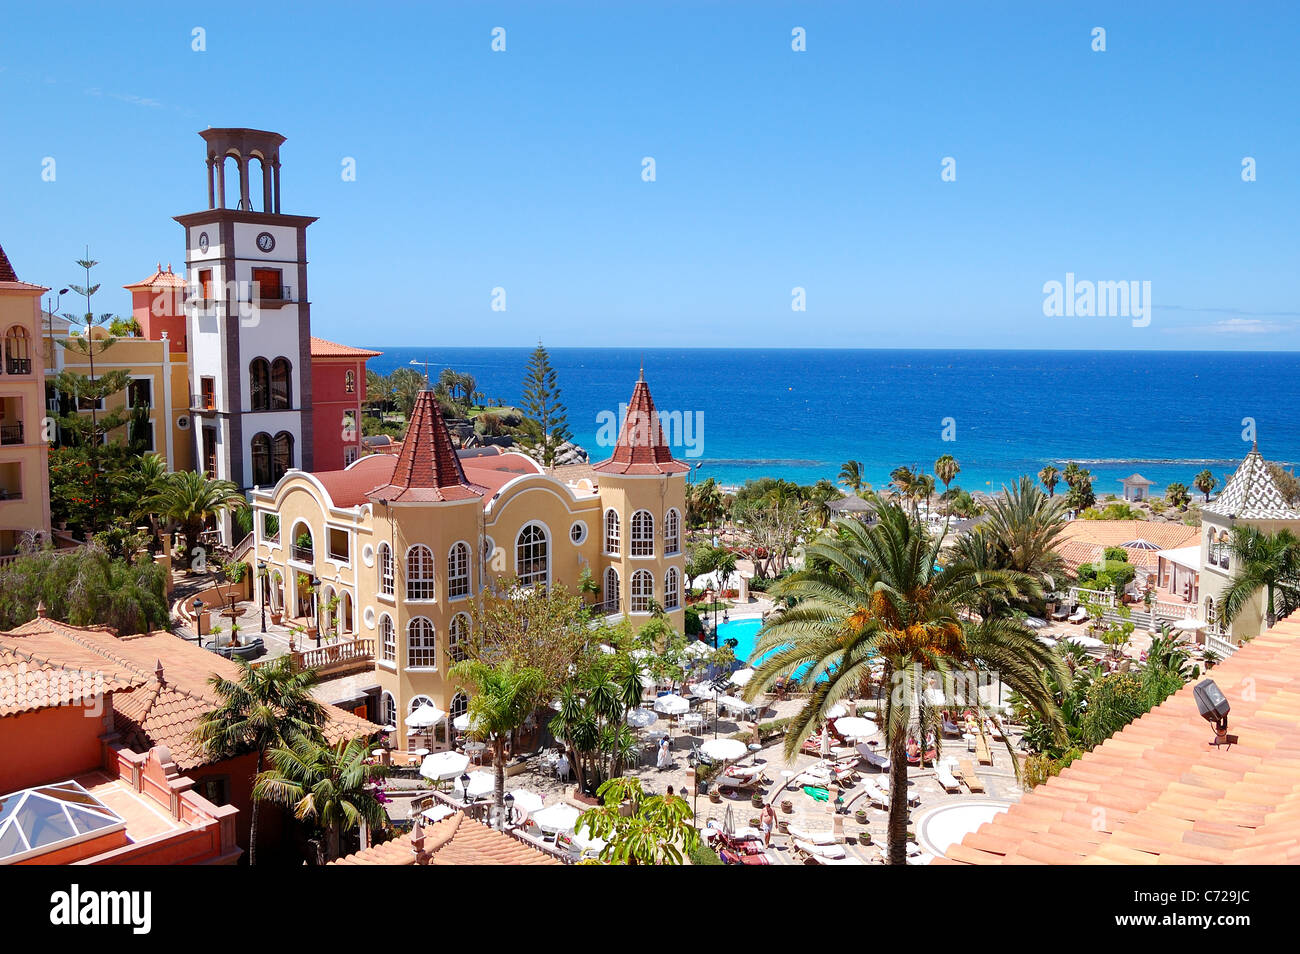 Tower with clock at the luxury hotel, Tenerife island, Spain Stock Photo